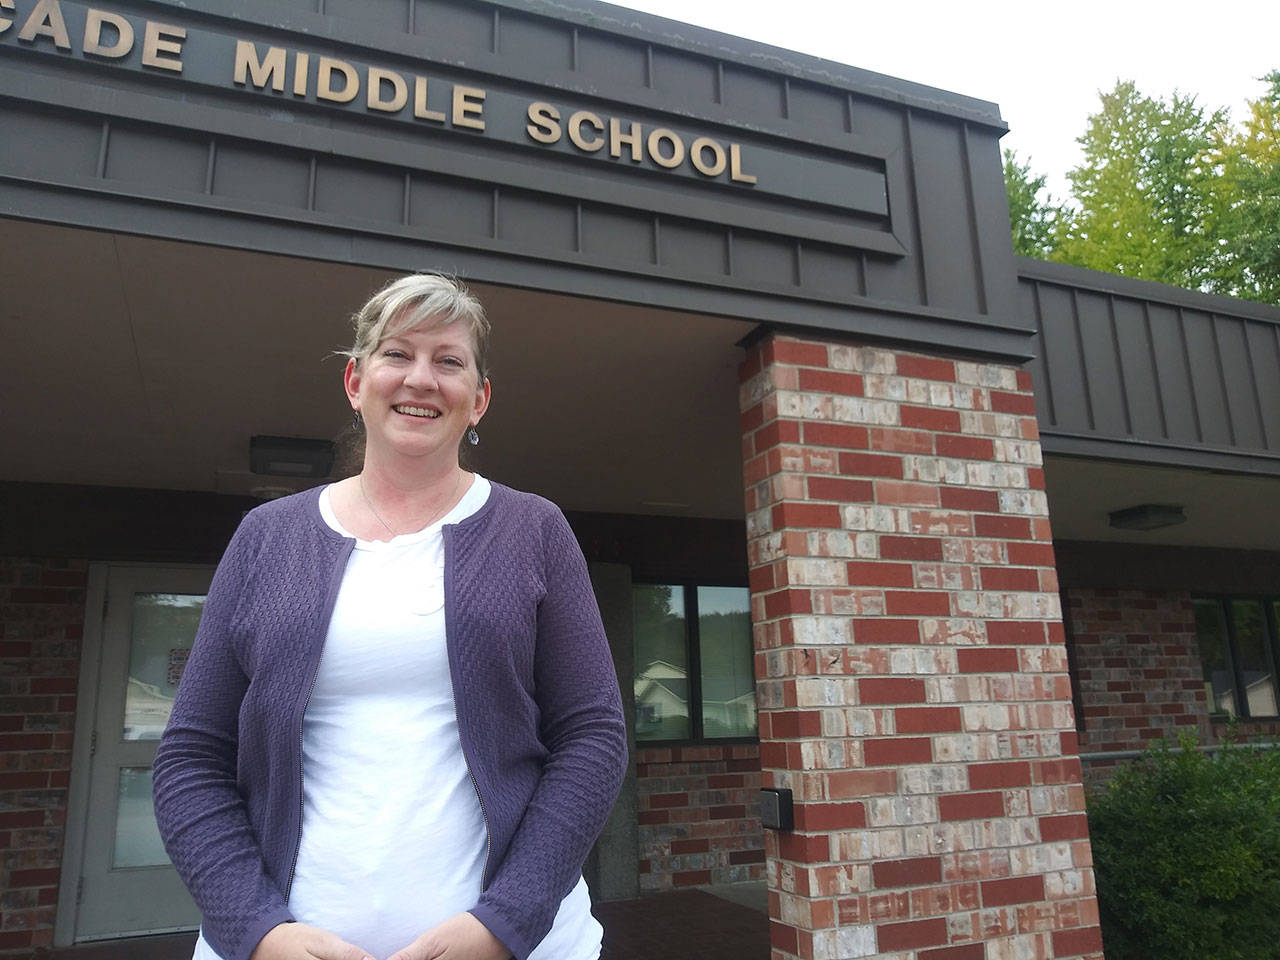 Meg McGroarty, Cascade Middle School’s new principal, looks to build on the relationships her predecessor, Isaiah Johnson, built at the school. ROBERT WHALE, Auburn Reporter